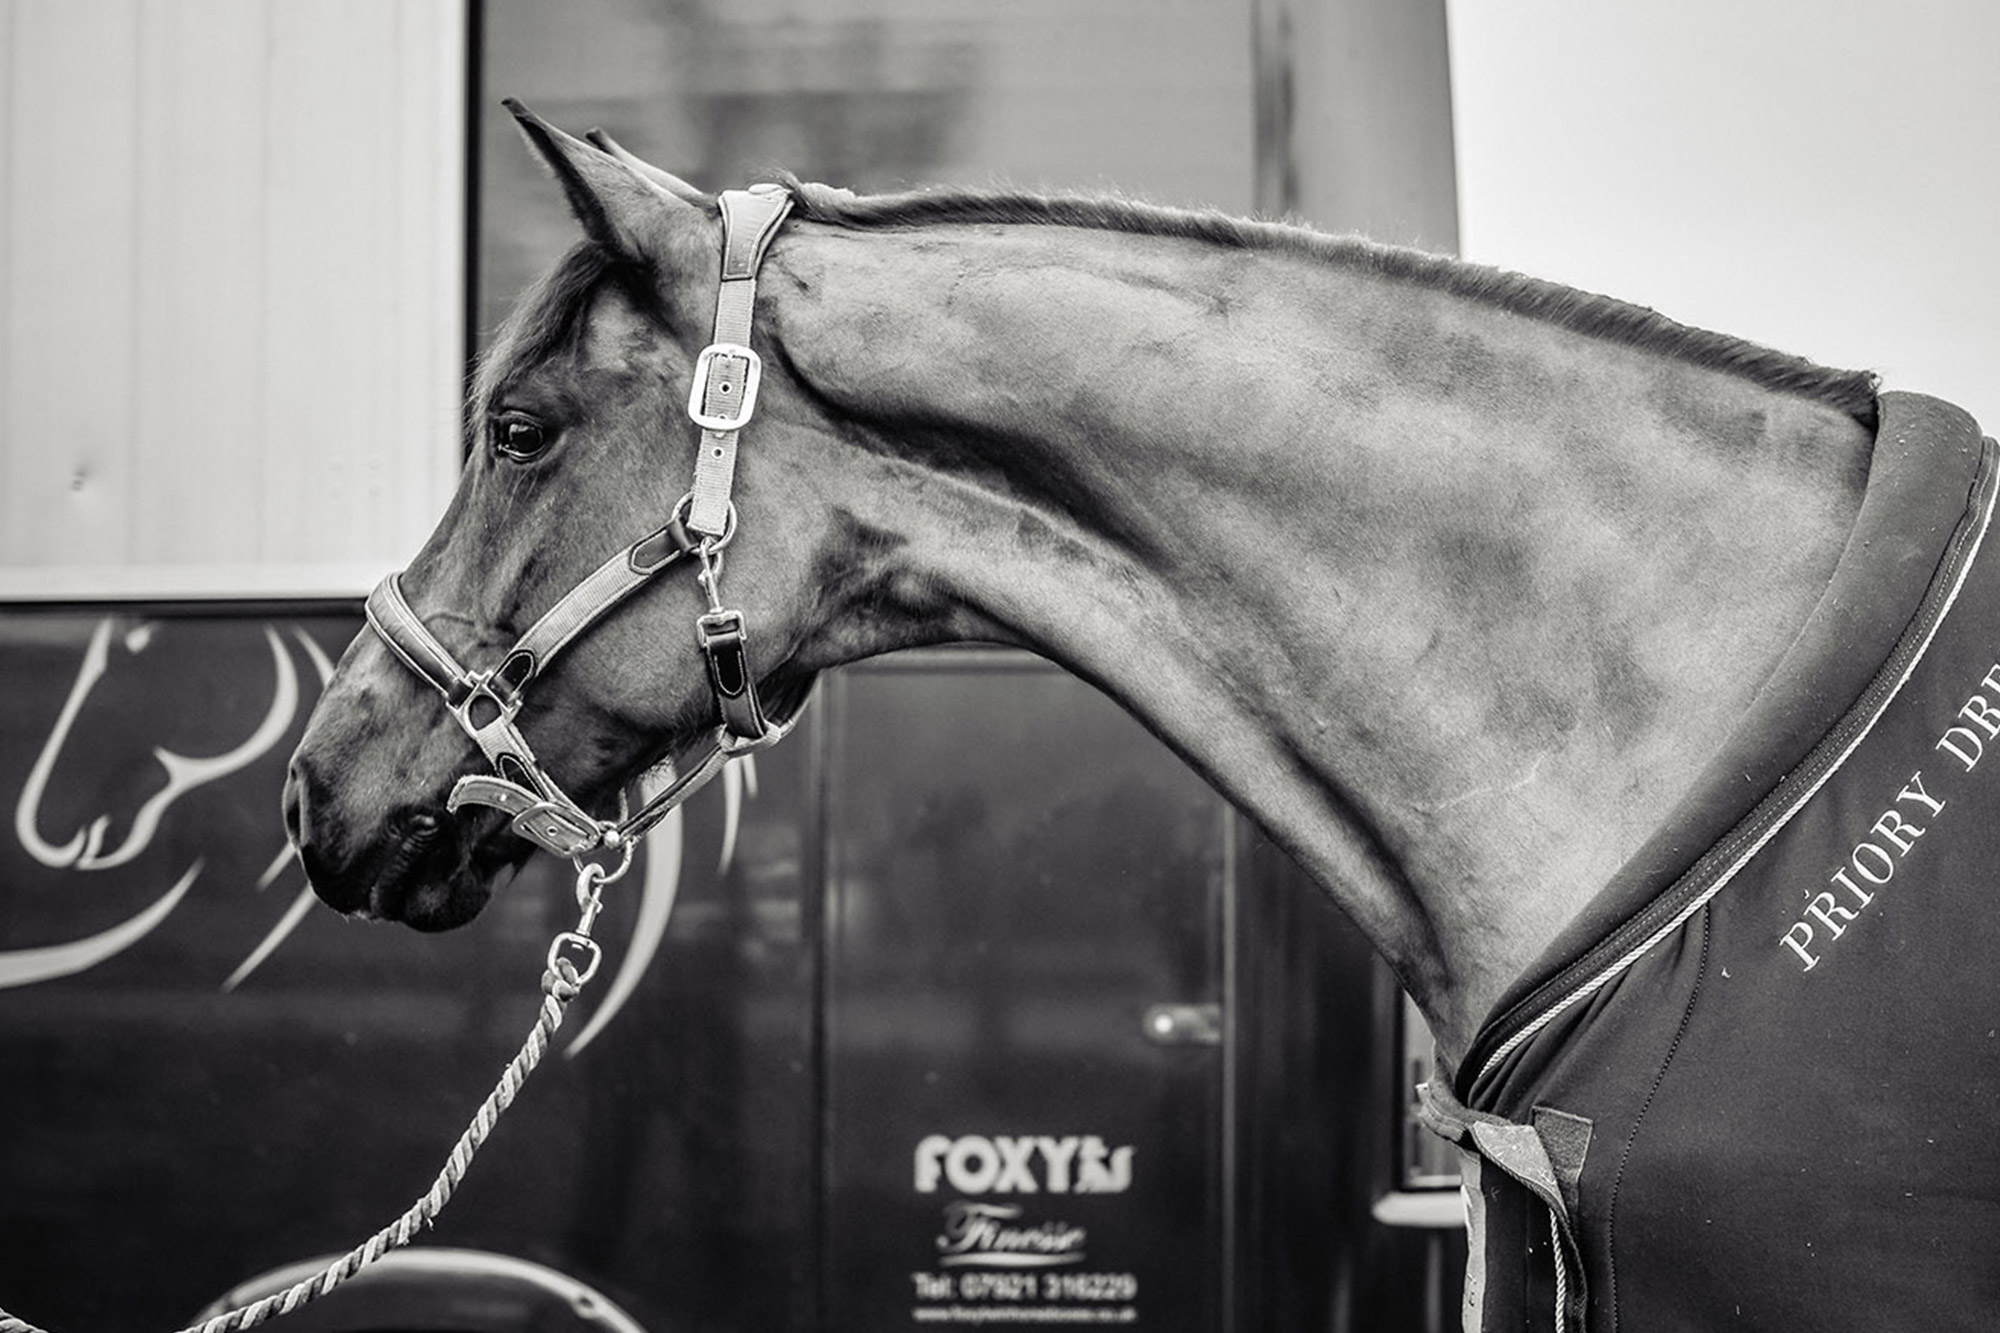 About Foxy horseboxes